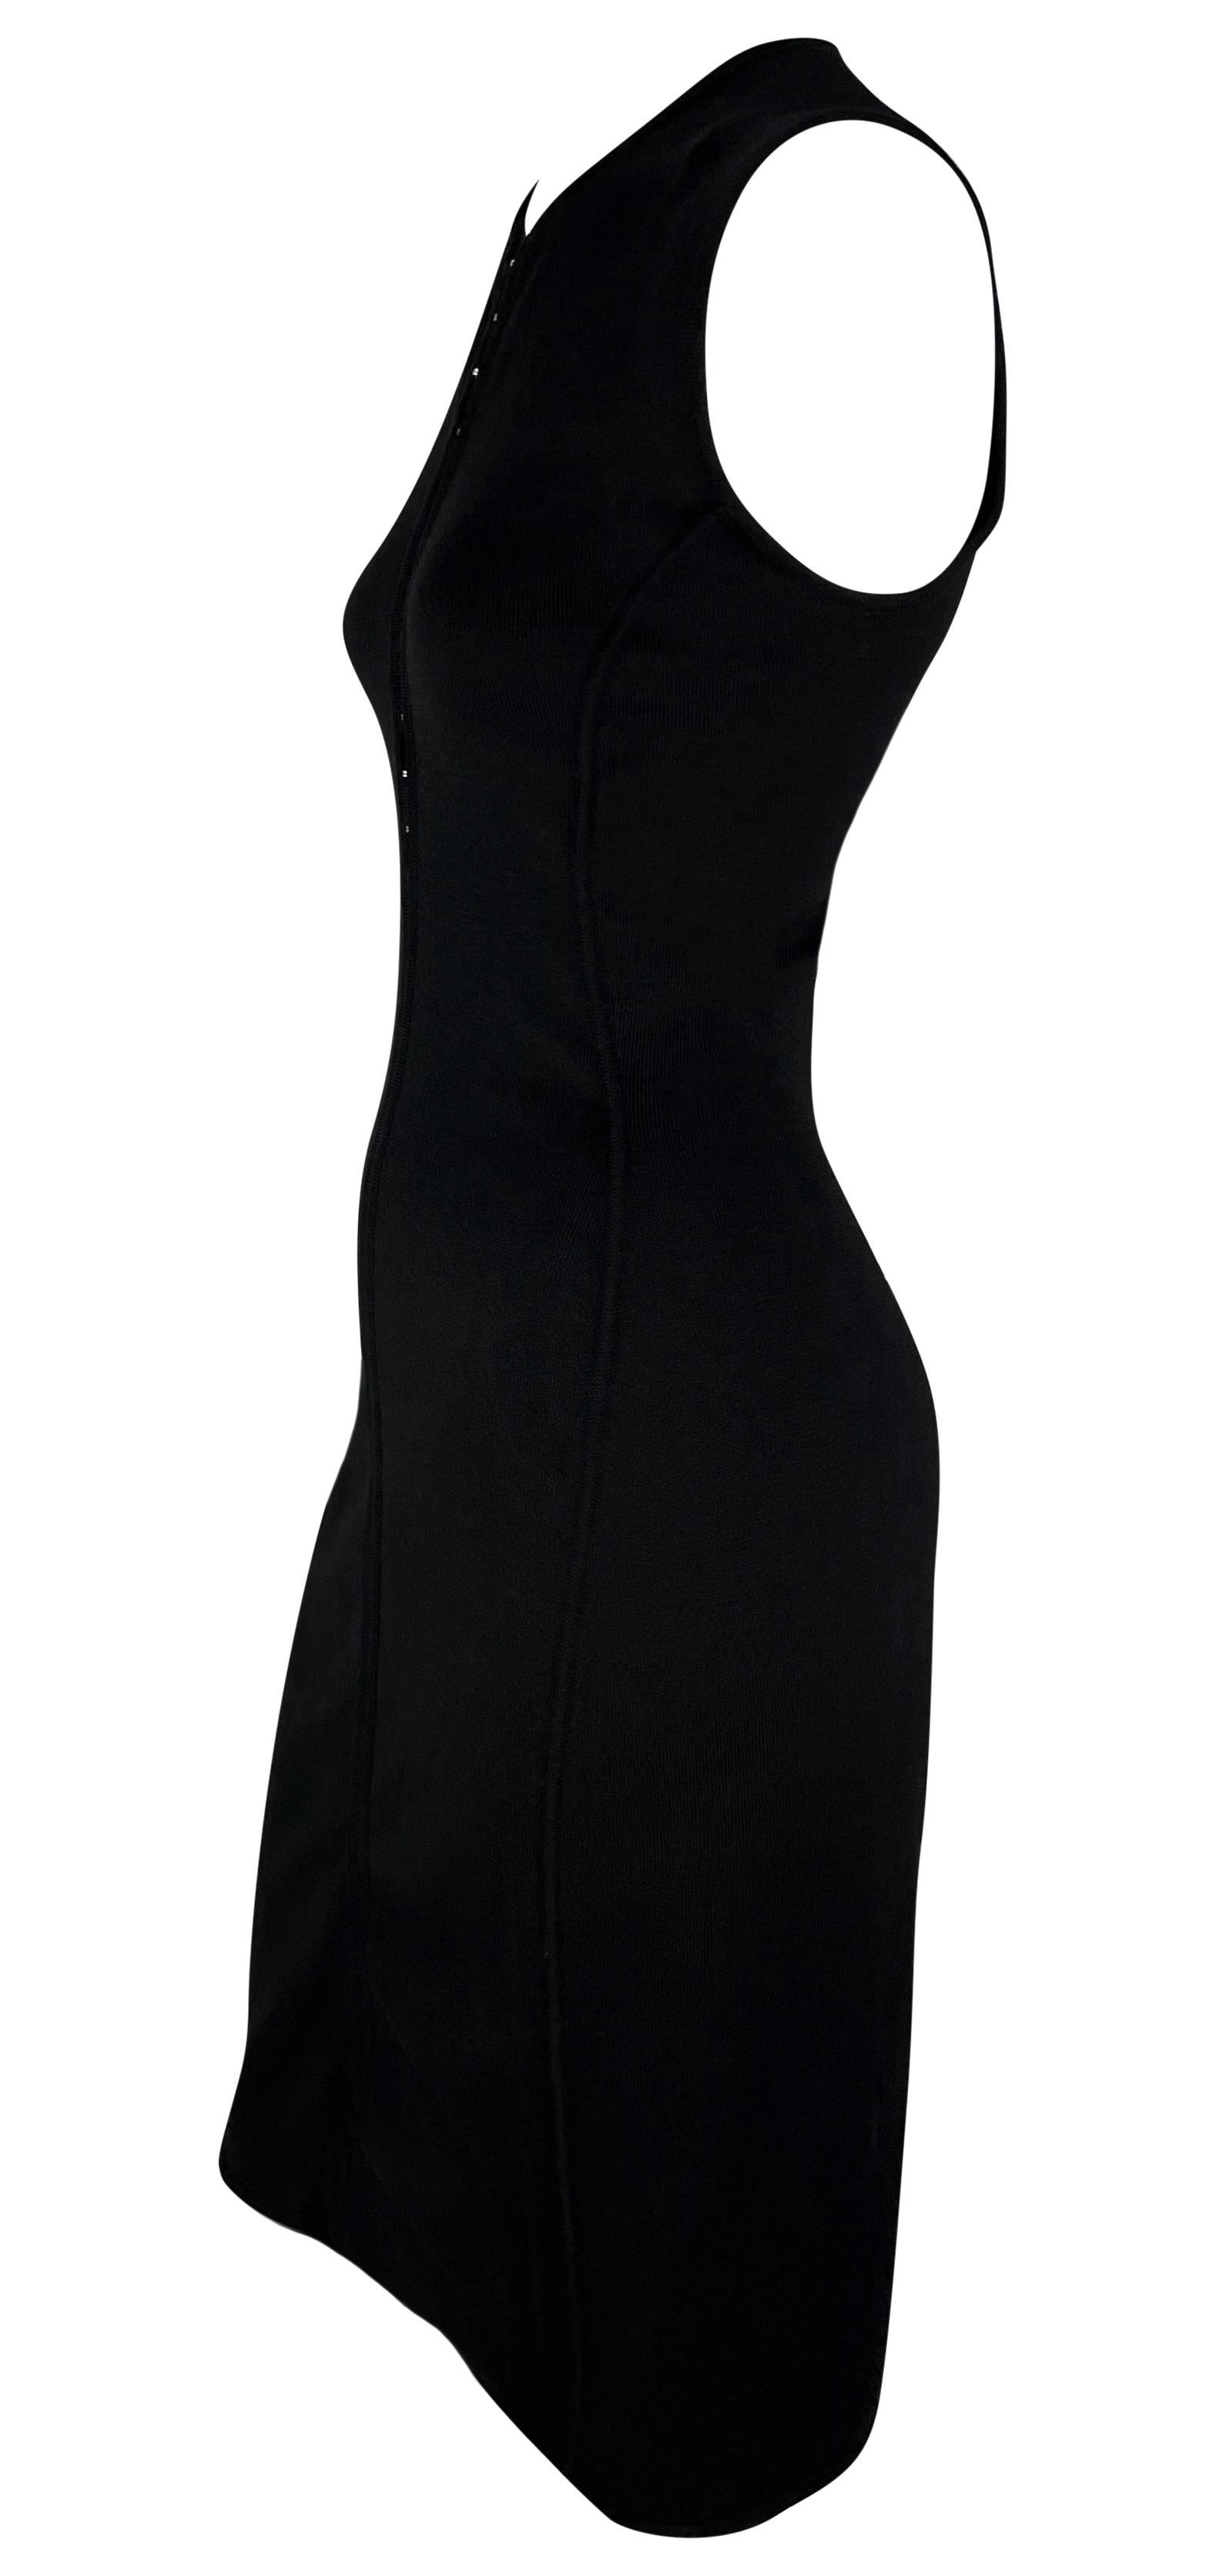 Women's S/S 2002 Gianni Versace by Donatella Black Bodycon Hook Eye Plunging Knit Dress For Sale